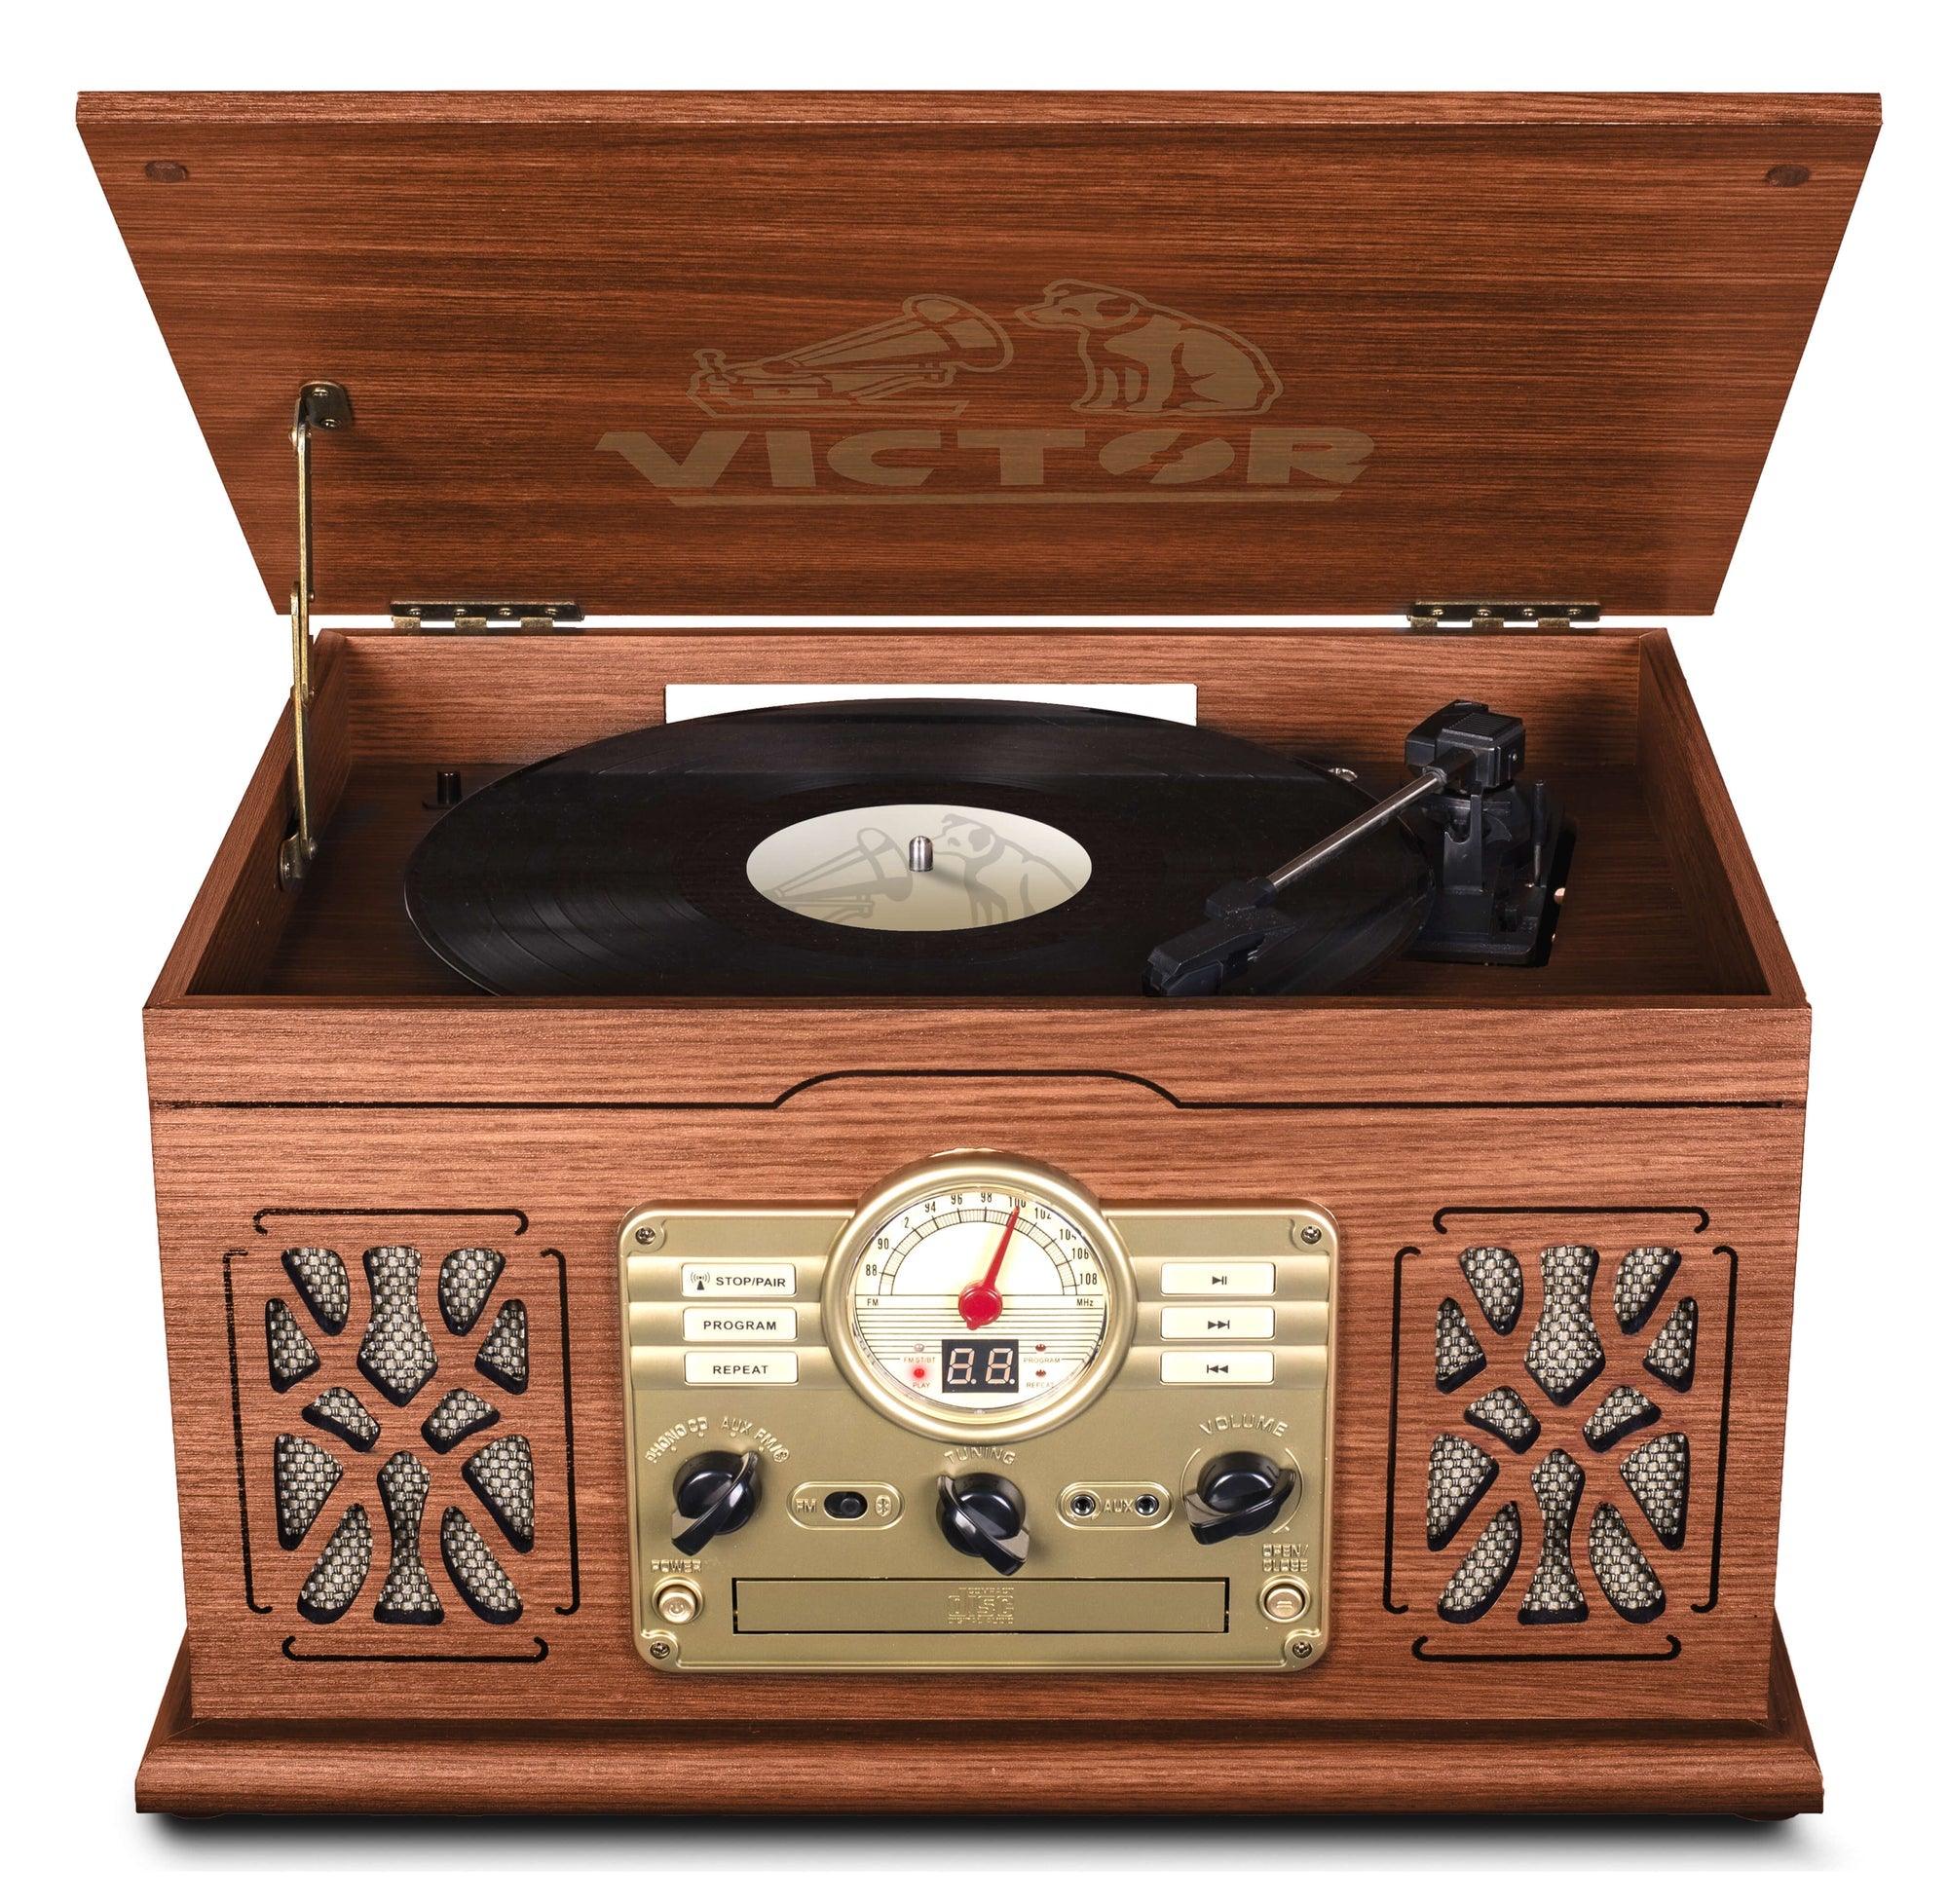 VYSN State 7-in-1 Wood Music Center with 3-Speed Turntable & Dual Bluetooth $299.99 (reg $500)